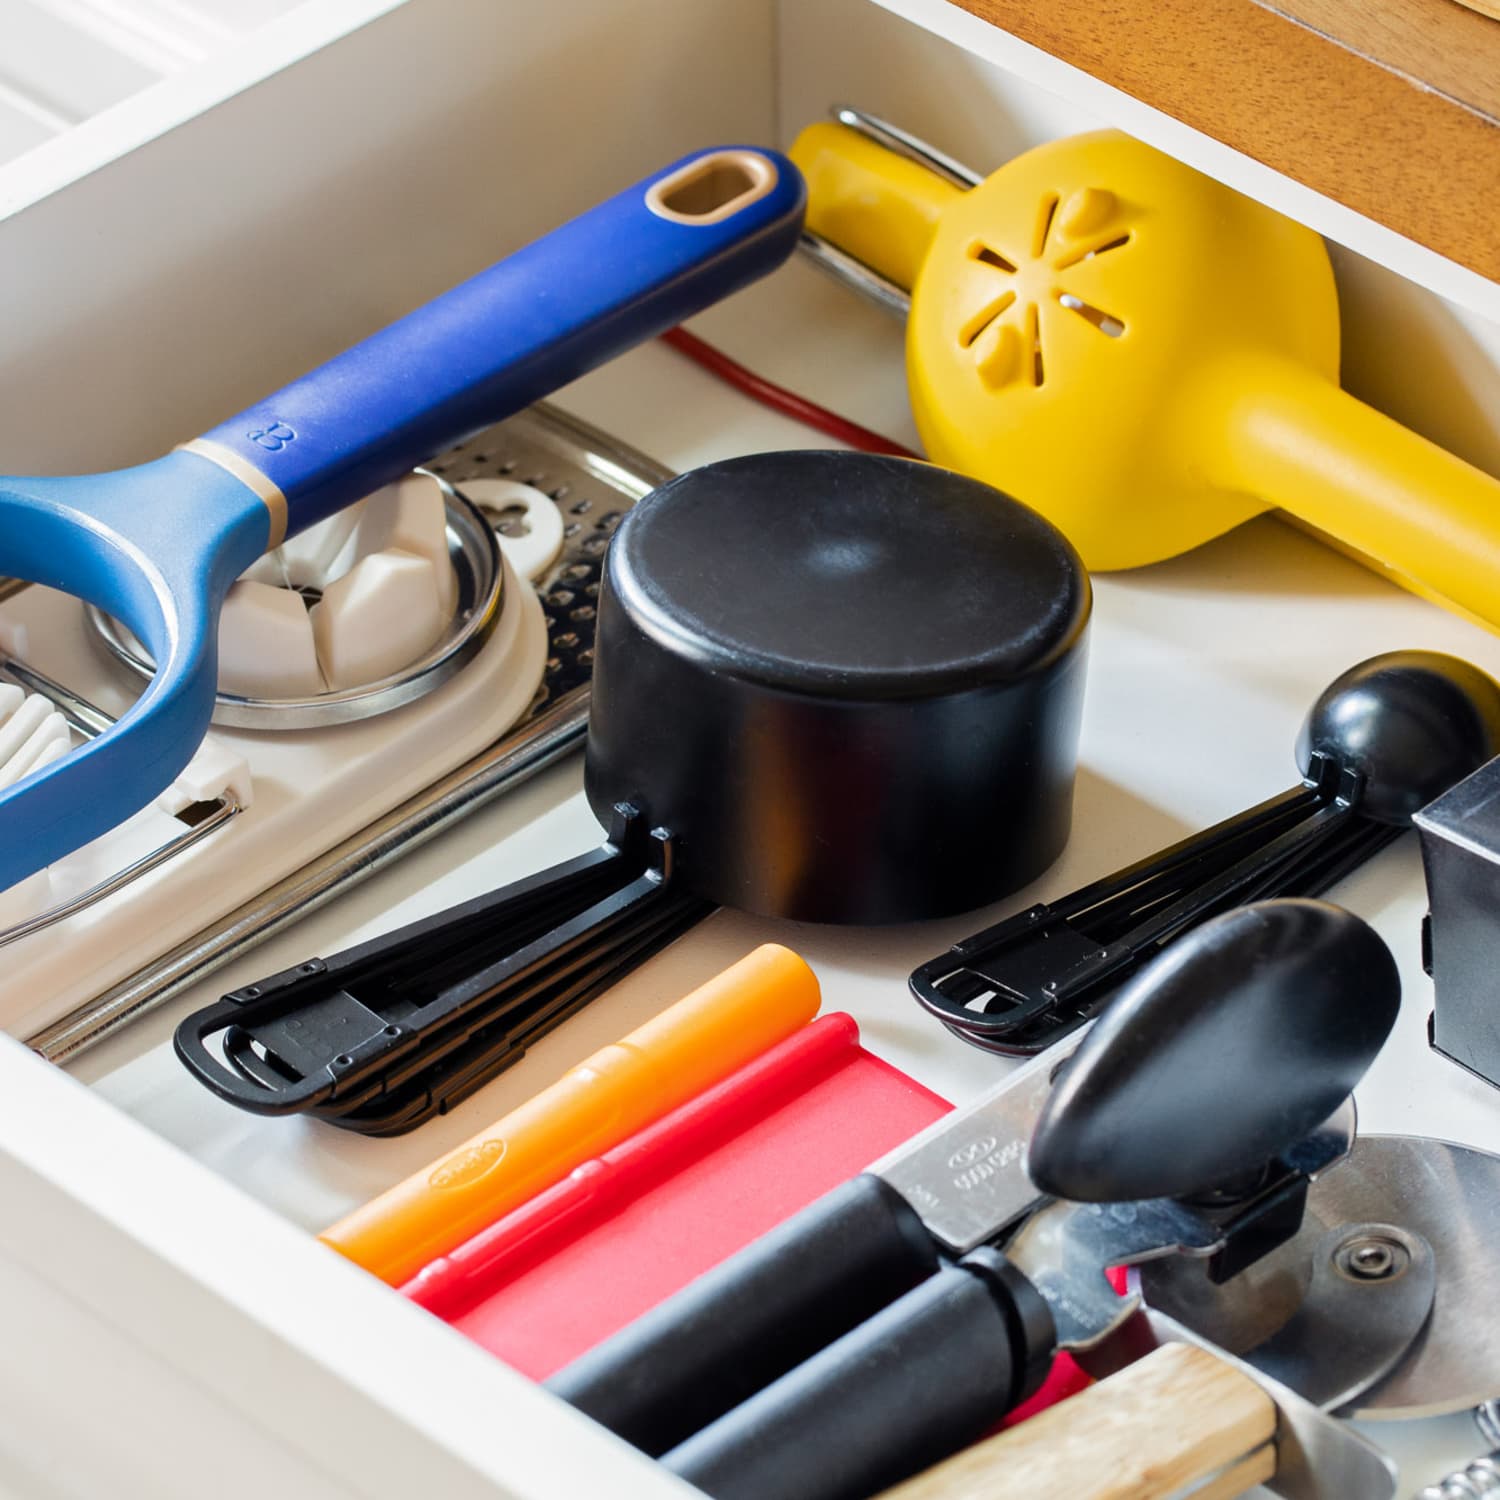 https://cdn.apartmenttherapy.info/image/upload/f_jpg,q_auto:eco,c_fill,g_auto,w_1500,ar_1:1/k%2FPhoto%2FLifestyle%2F2021-08-The-Most-Brilliant-Drawer-Organizing-Tip-That-Everyone-Needs-to-Hear%2Fdrawer-organizing-tips-crop